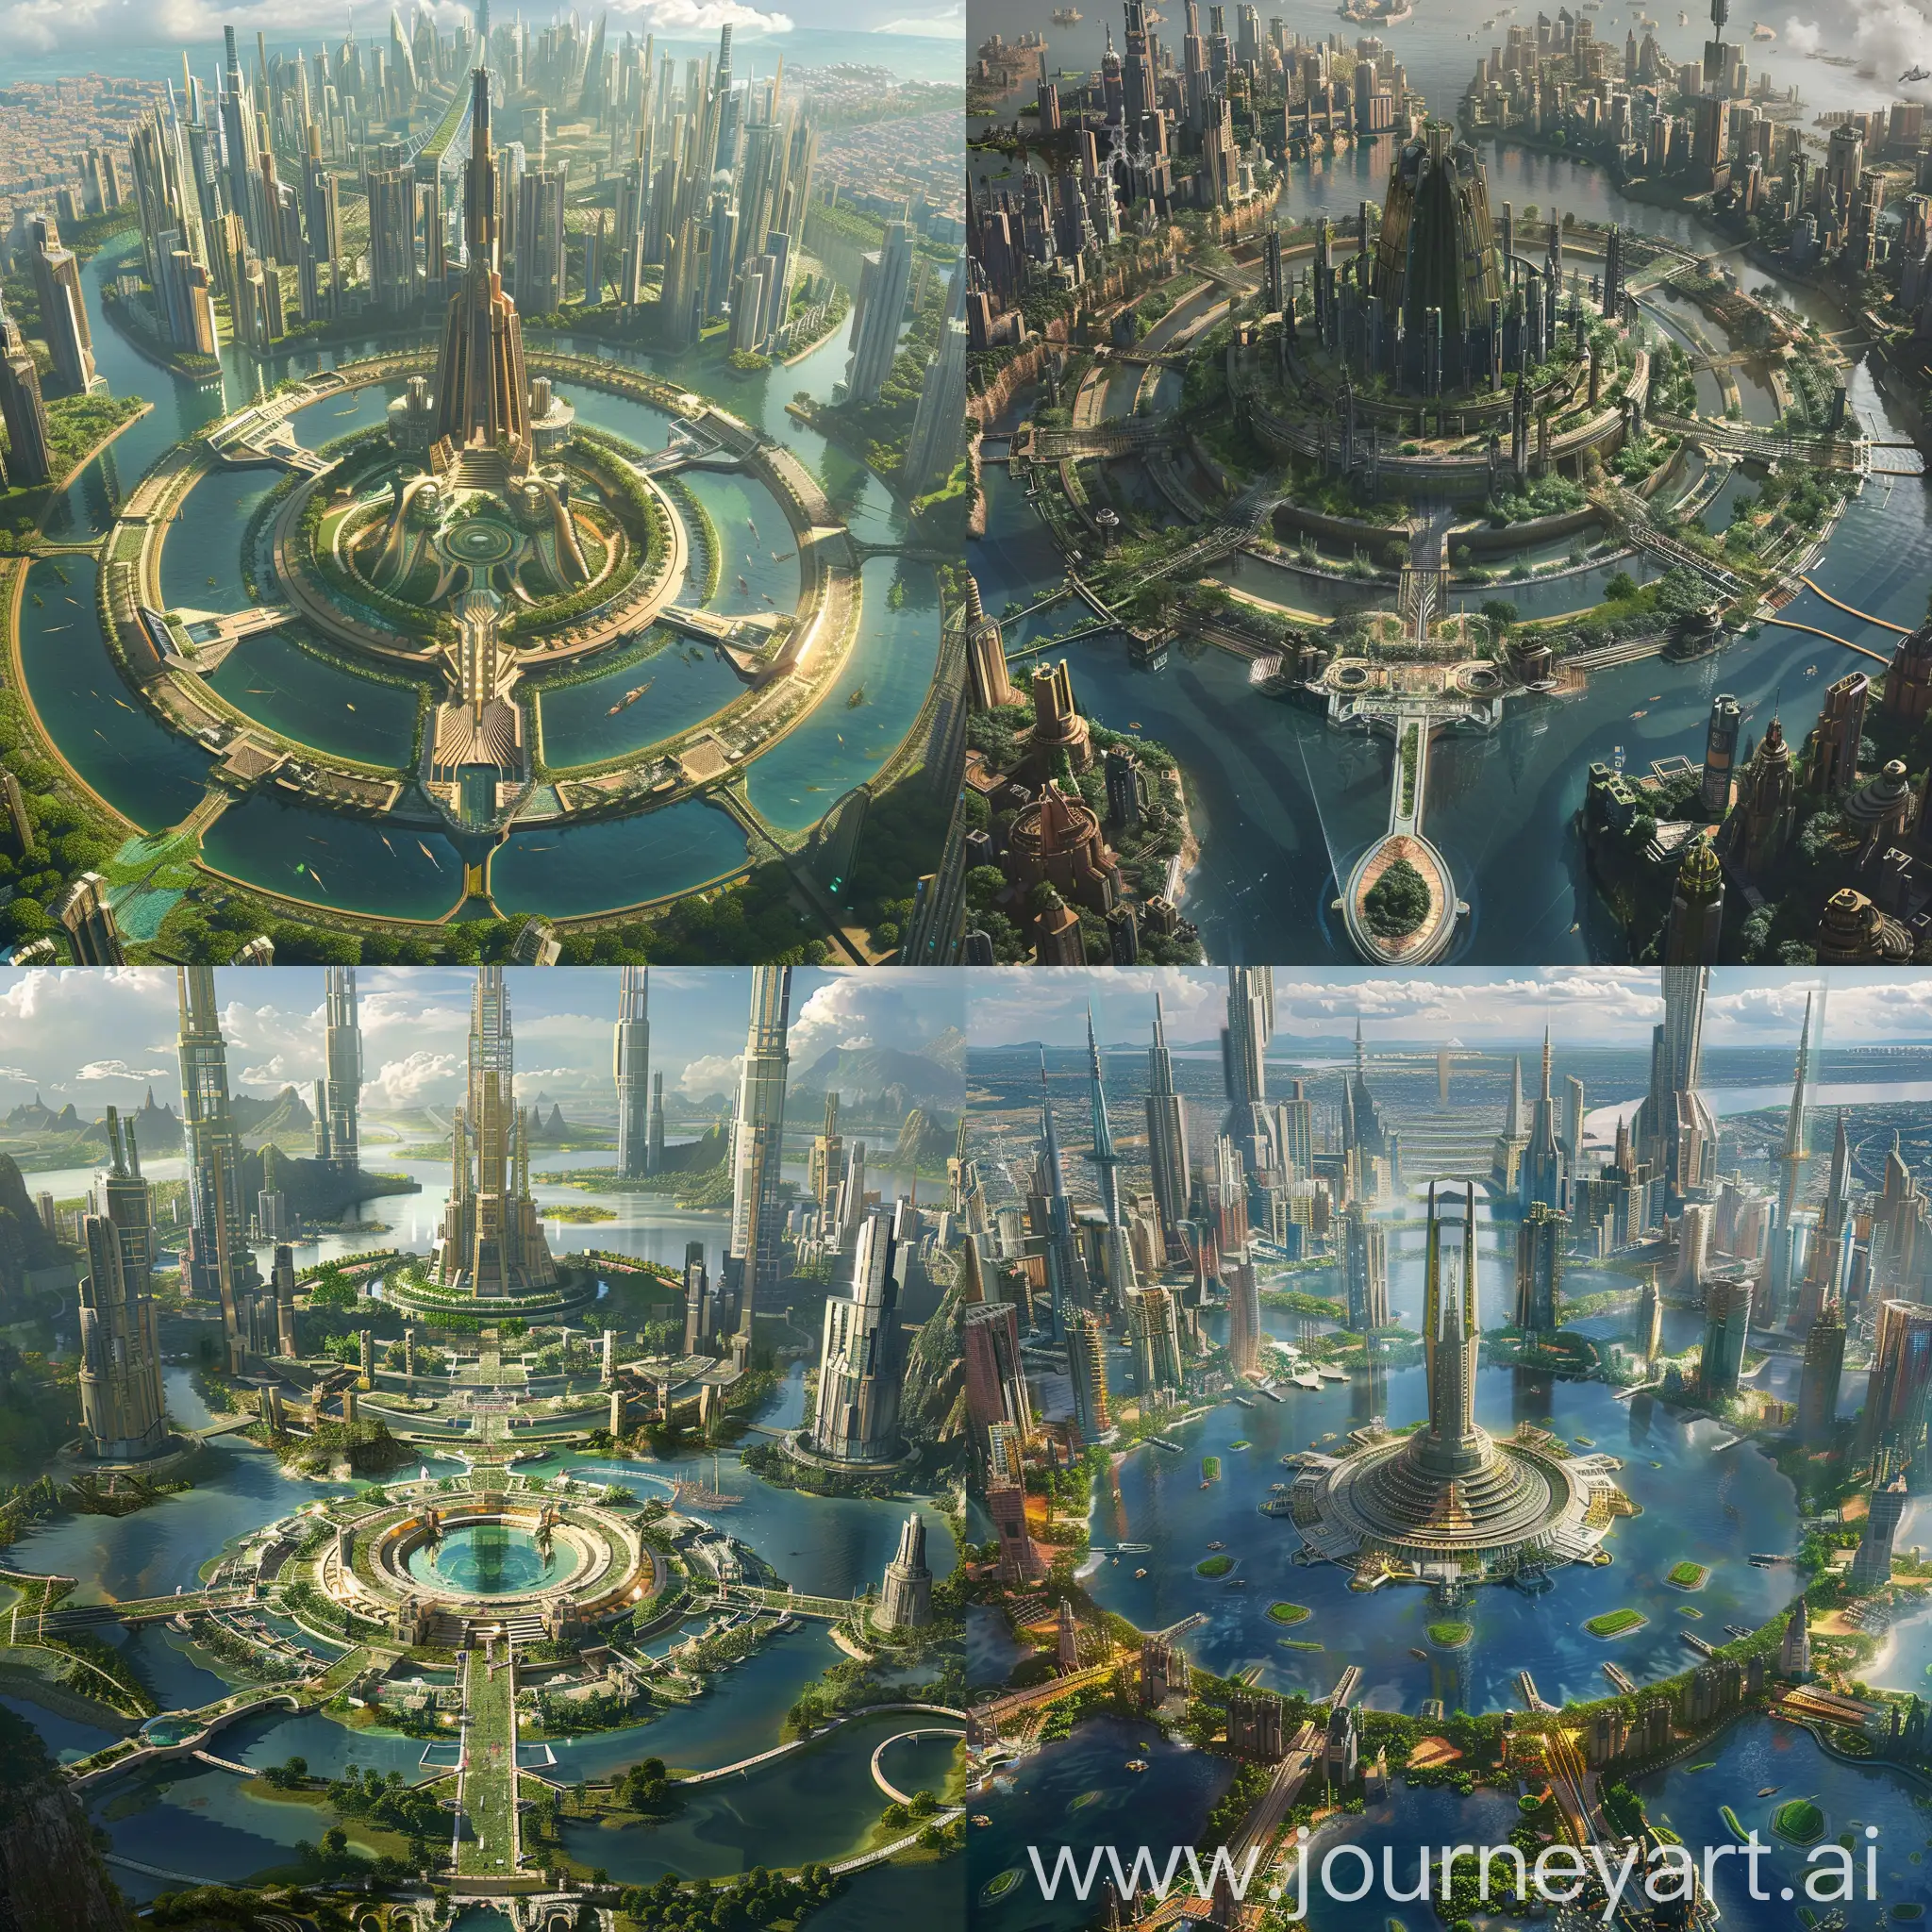 A captivating vision of the mythical city of Atlantis, reimagined as a futuristic metropolis. Ancient yet advanced, it is home to a diverse population of people of African descent, depicted with striking realism and cultural detail. The central hub is a magnificent circular temple, encircled by stunning skyscrapers that reach for the heavens, and lush, verdant gardens that breathe life into the cityscape. The intricate landscape is a symphony of water, with a vast central body reflecting the city's majesty, while smaller canals and waterways intertwine like veins, connecting the various parts of this wondrous city.